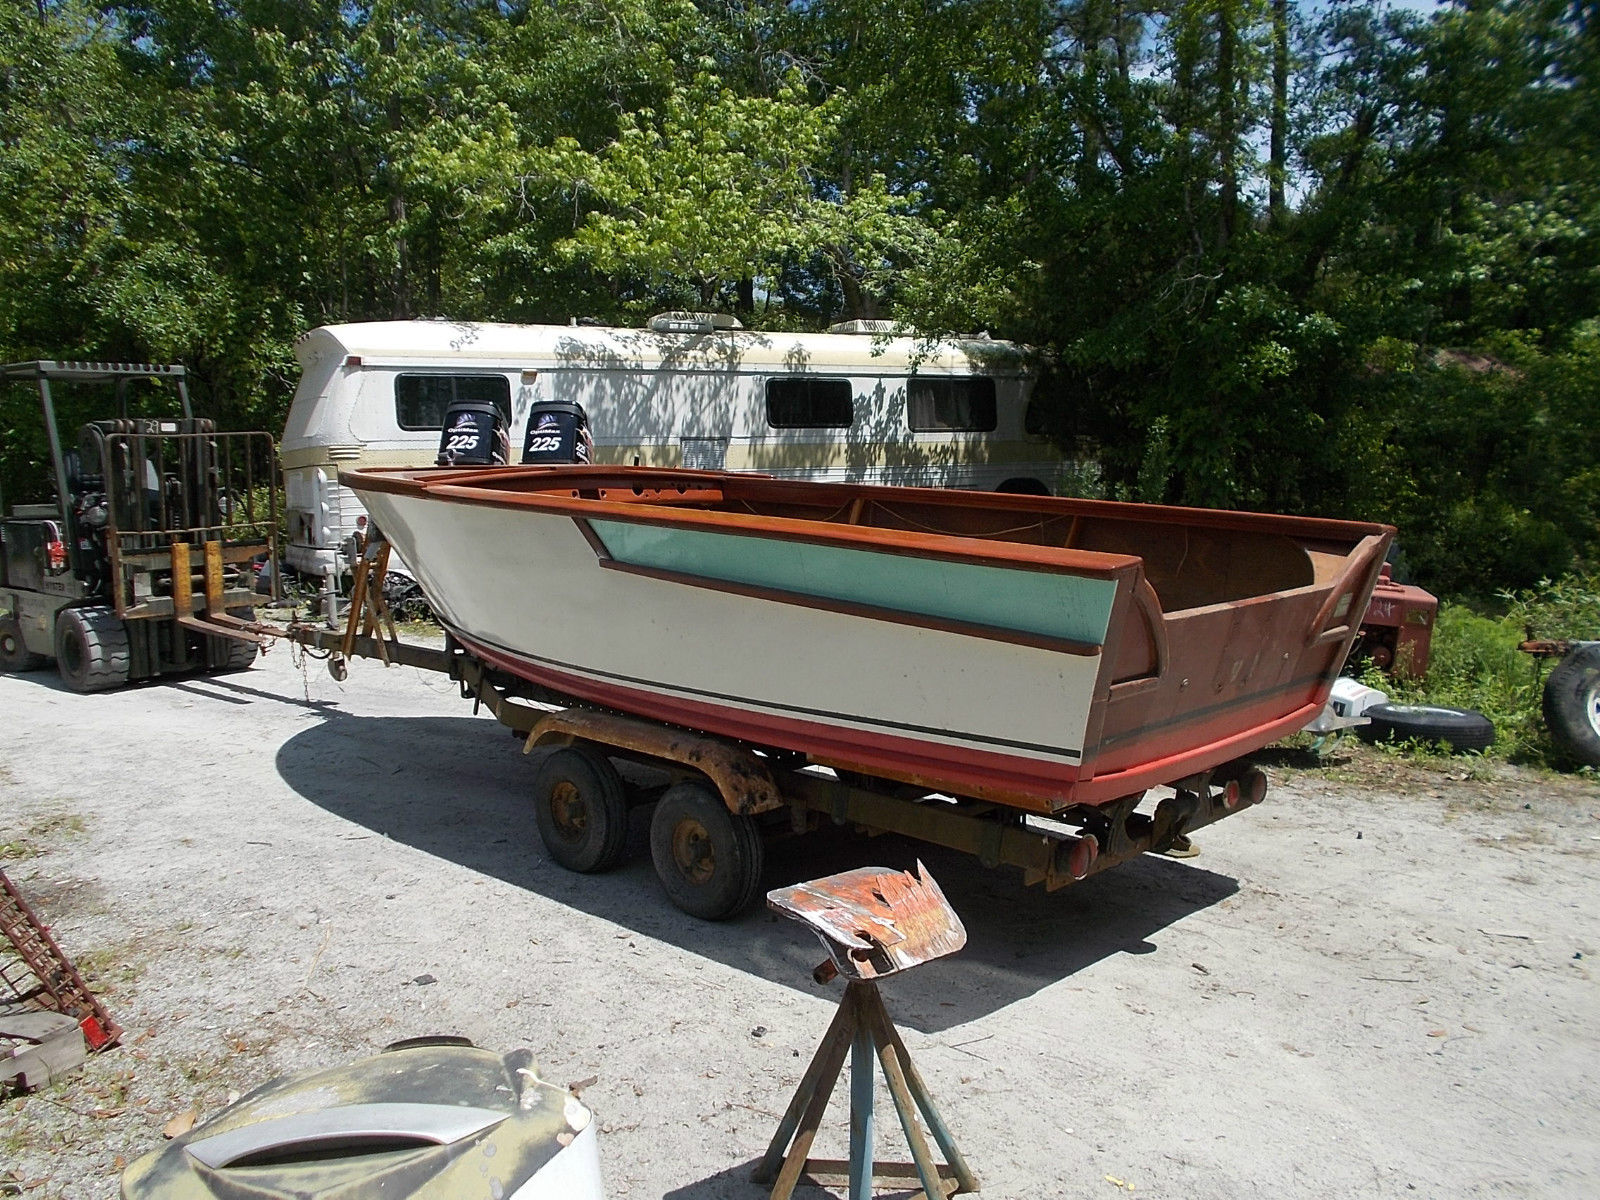 trojan seaqueen 1959 for sale for $1,988 - boats-from-usa.com